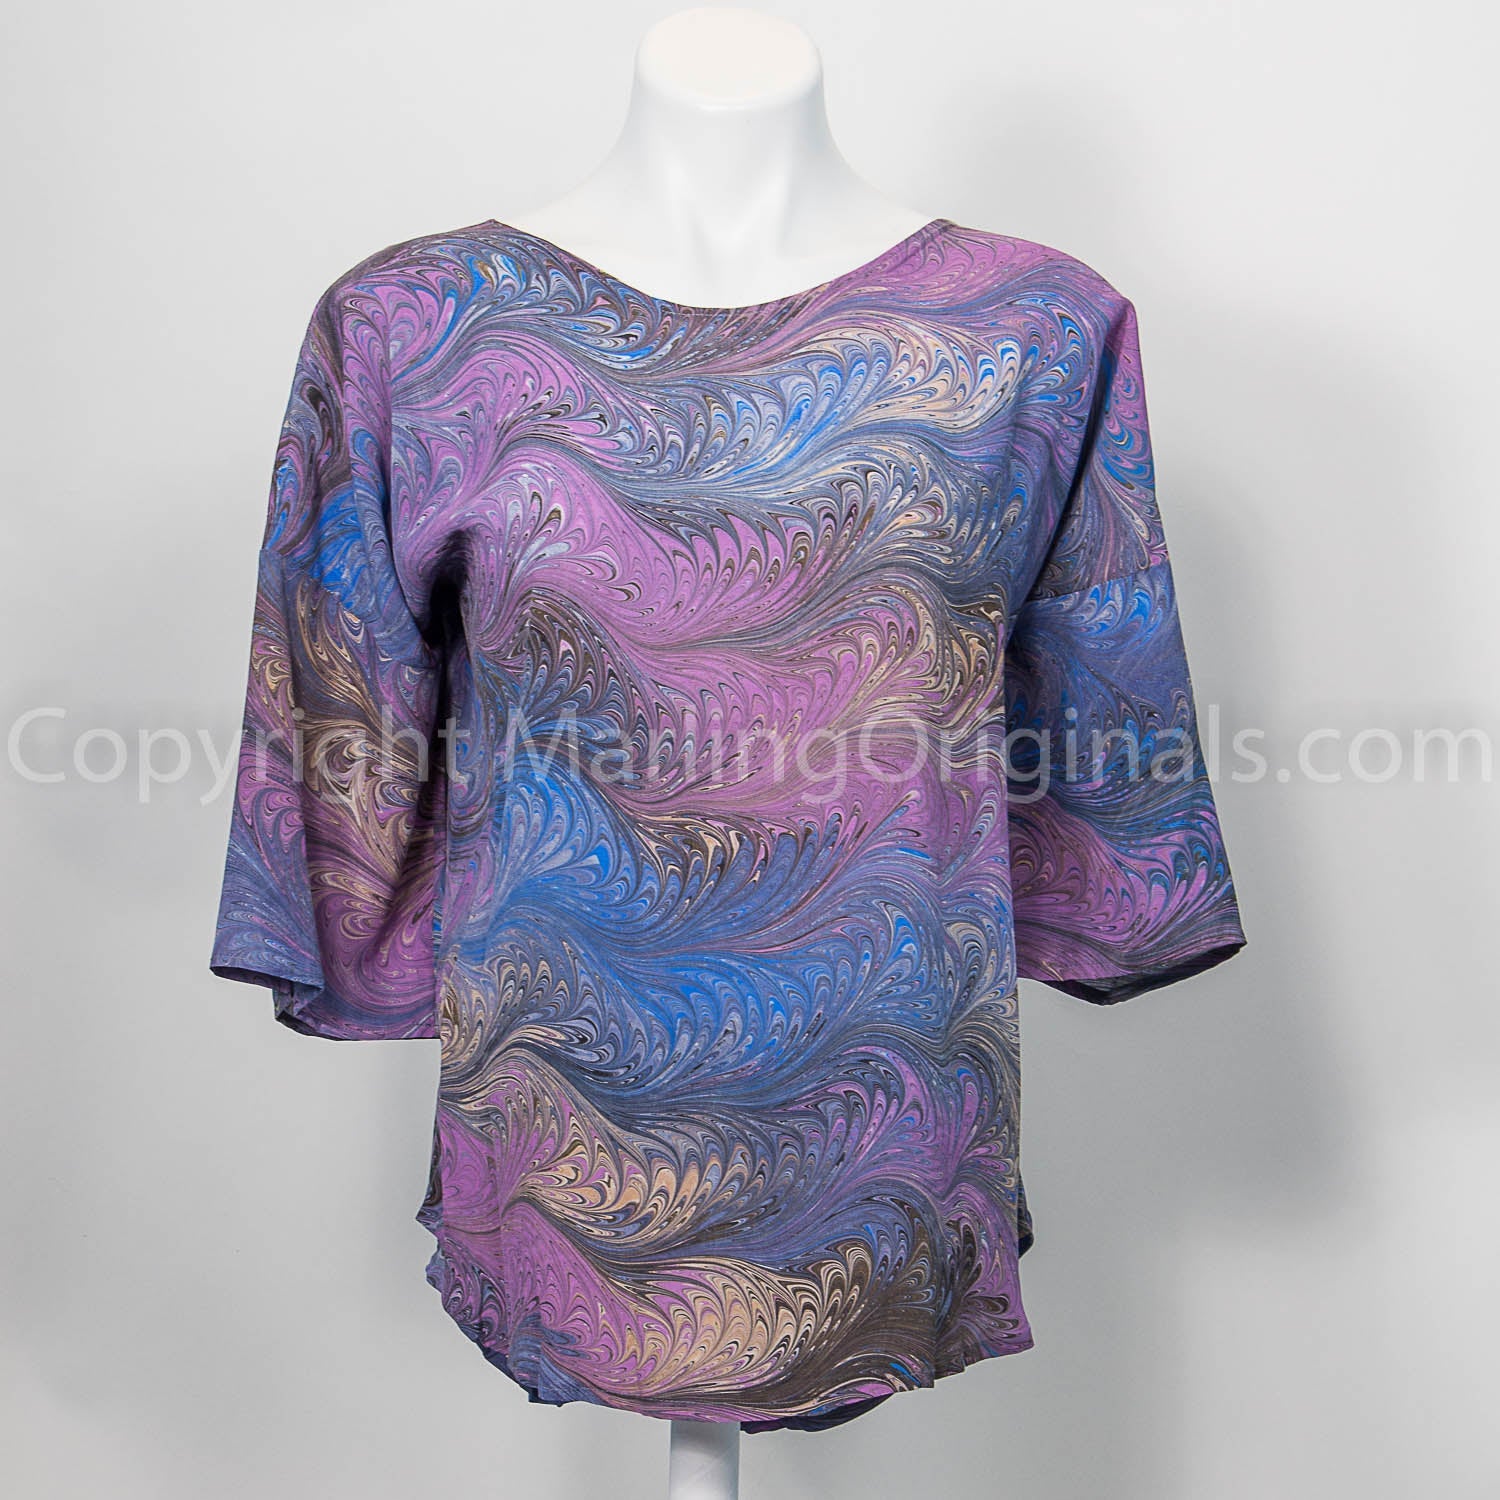 silk top marbled in a feathered pattern with rich lavender, soft blue, peach and gray colors